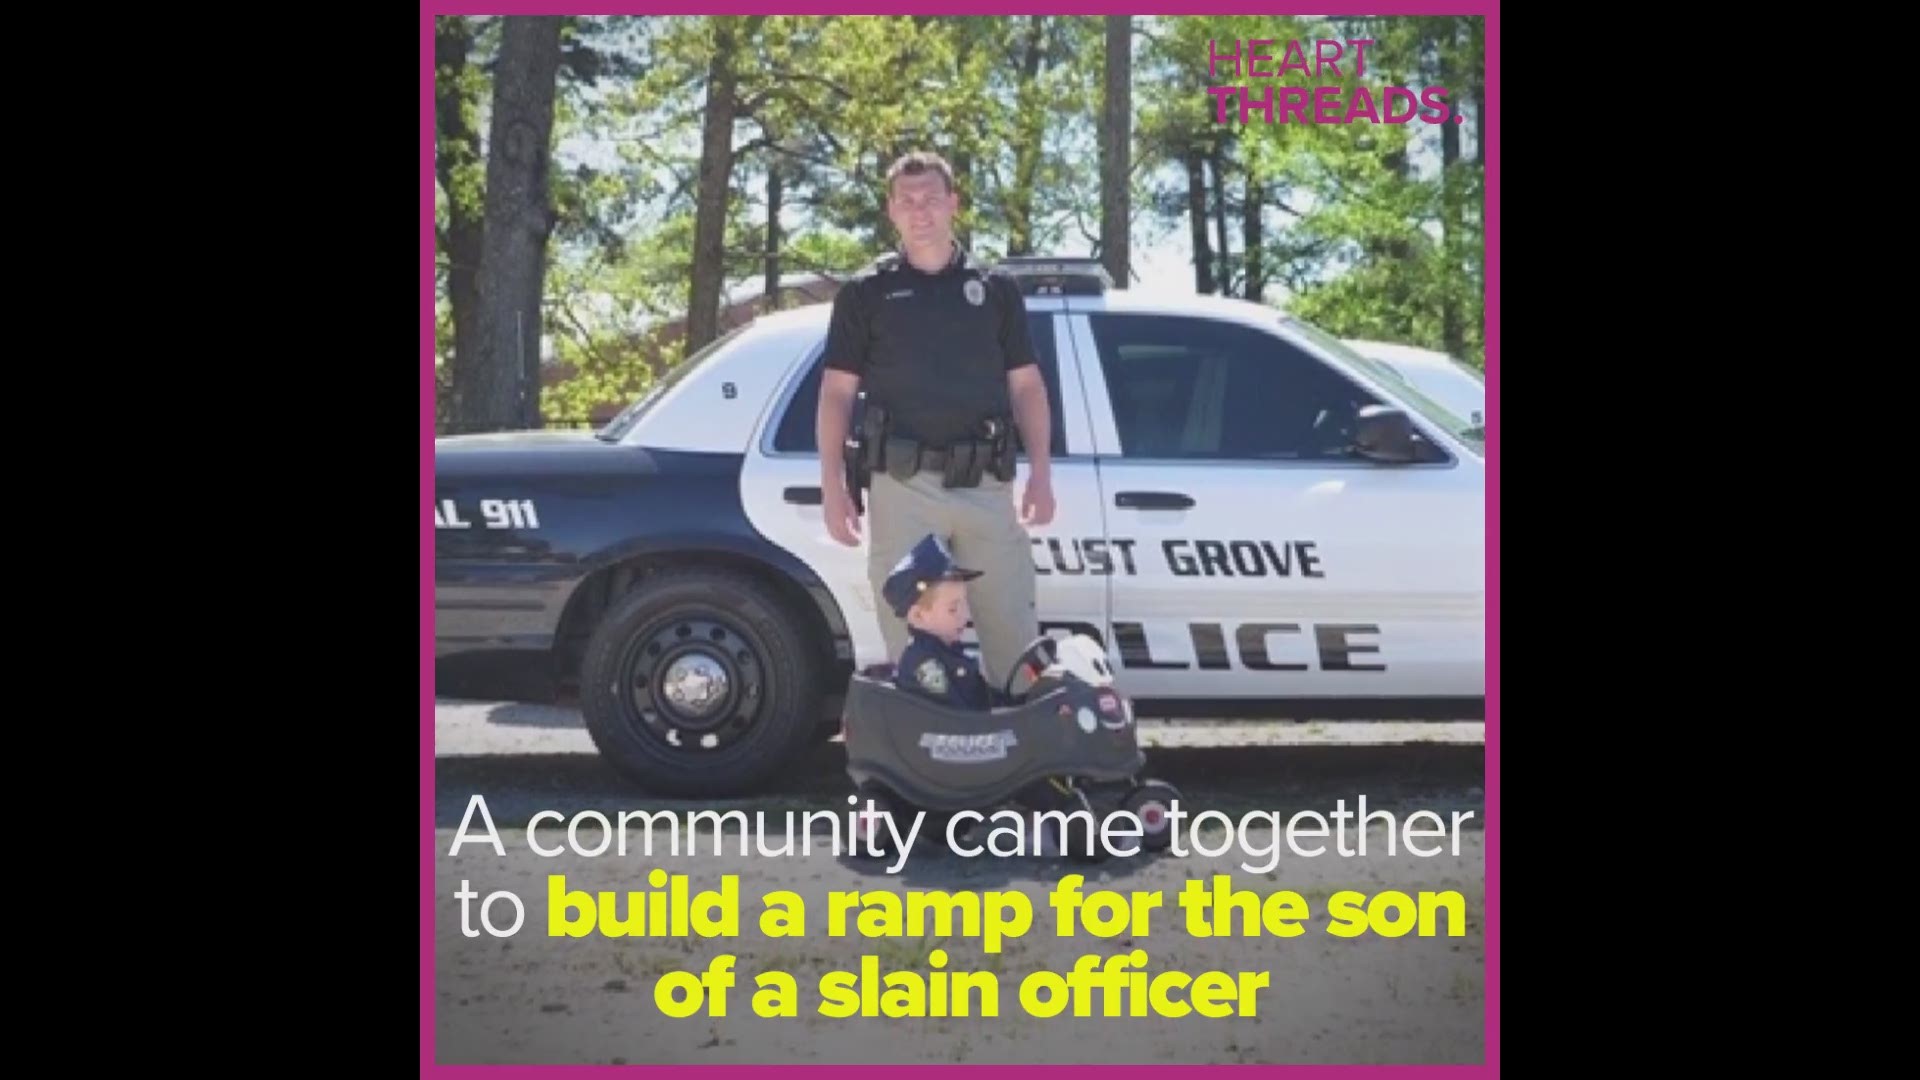 Chase Maddox was killed in the line of duty in 2018 leaving behind a wife and two boys. So the community came together to build a wheelchair ramp for Chase's oldest son.